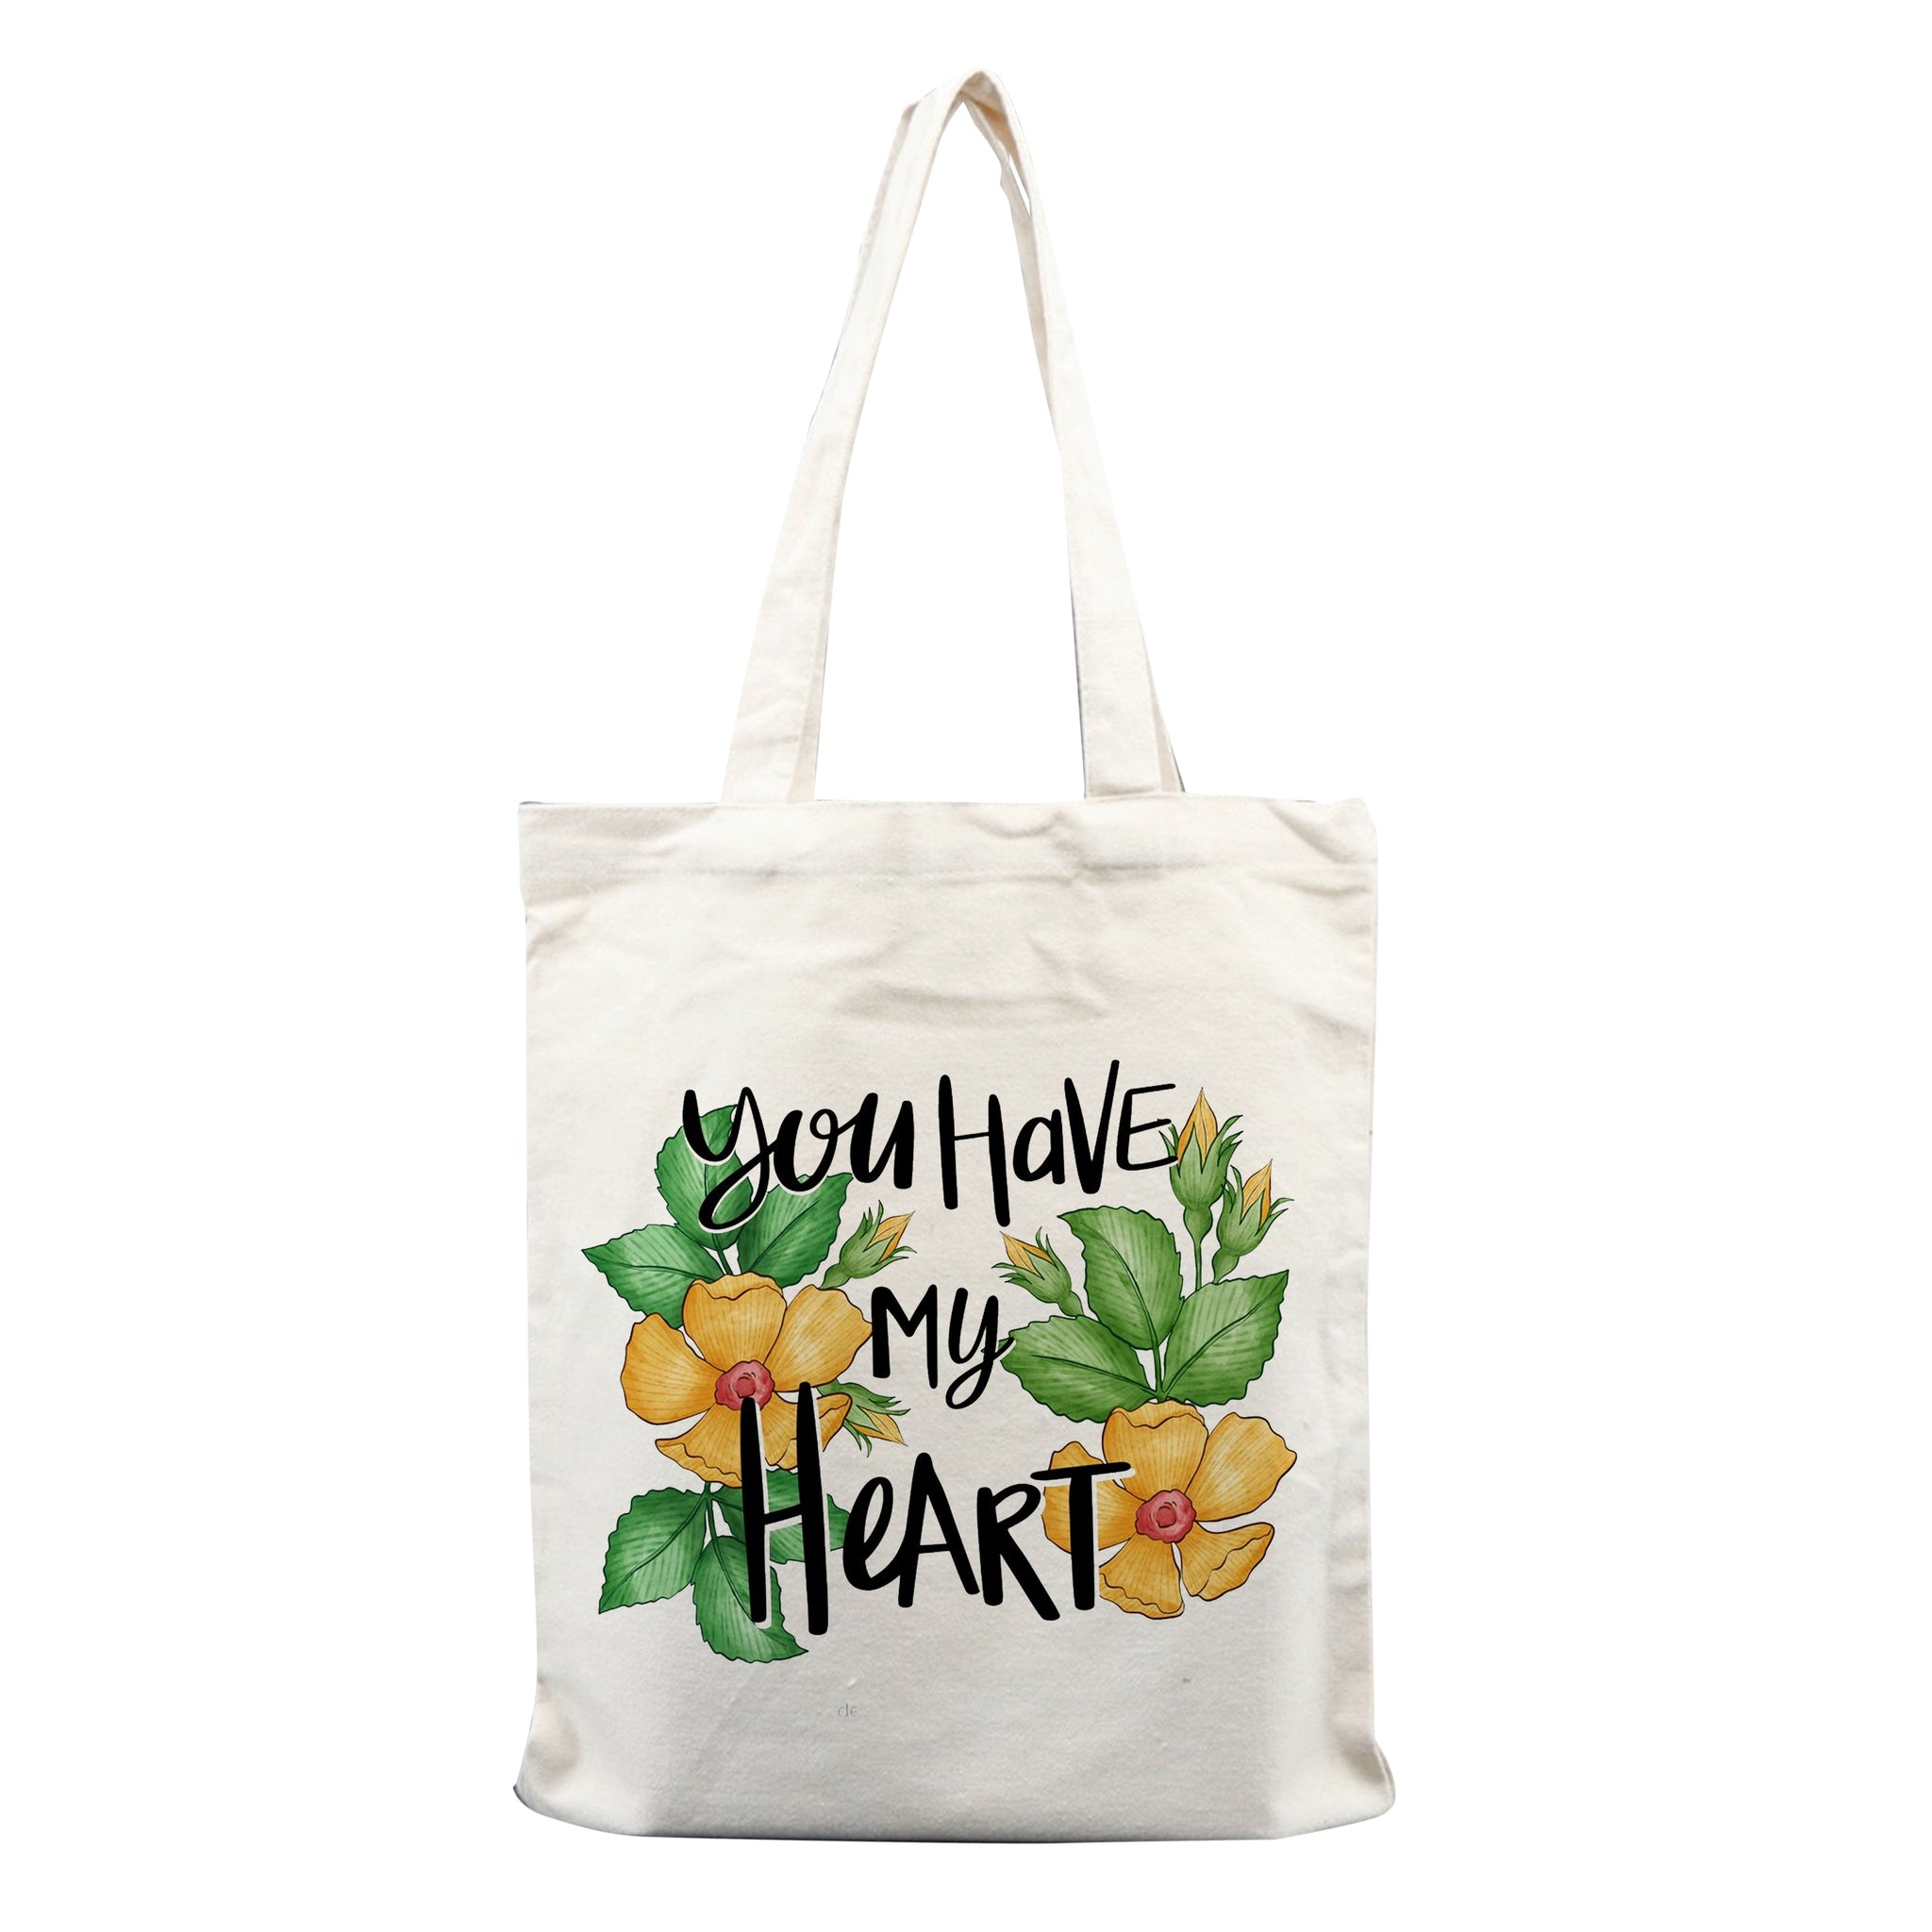 Chillaao  you have my heart tote bag